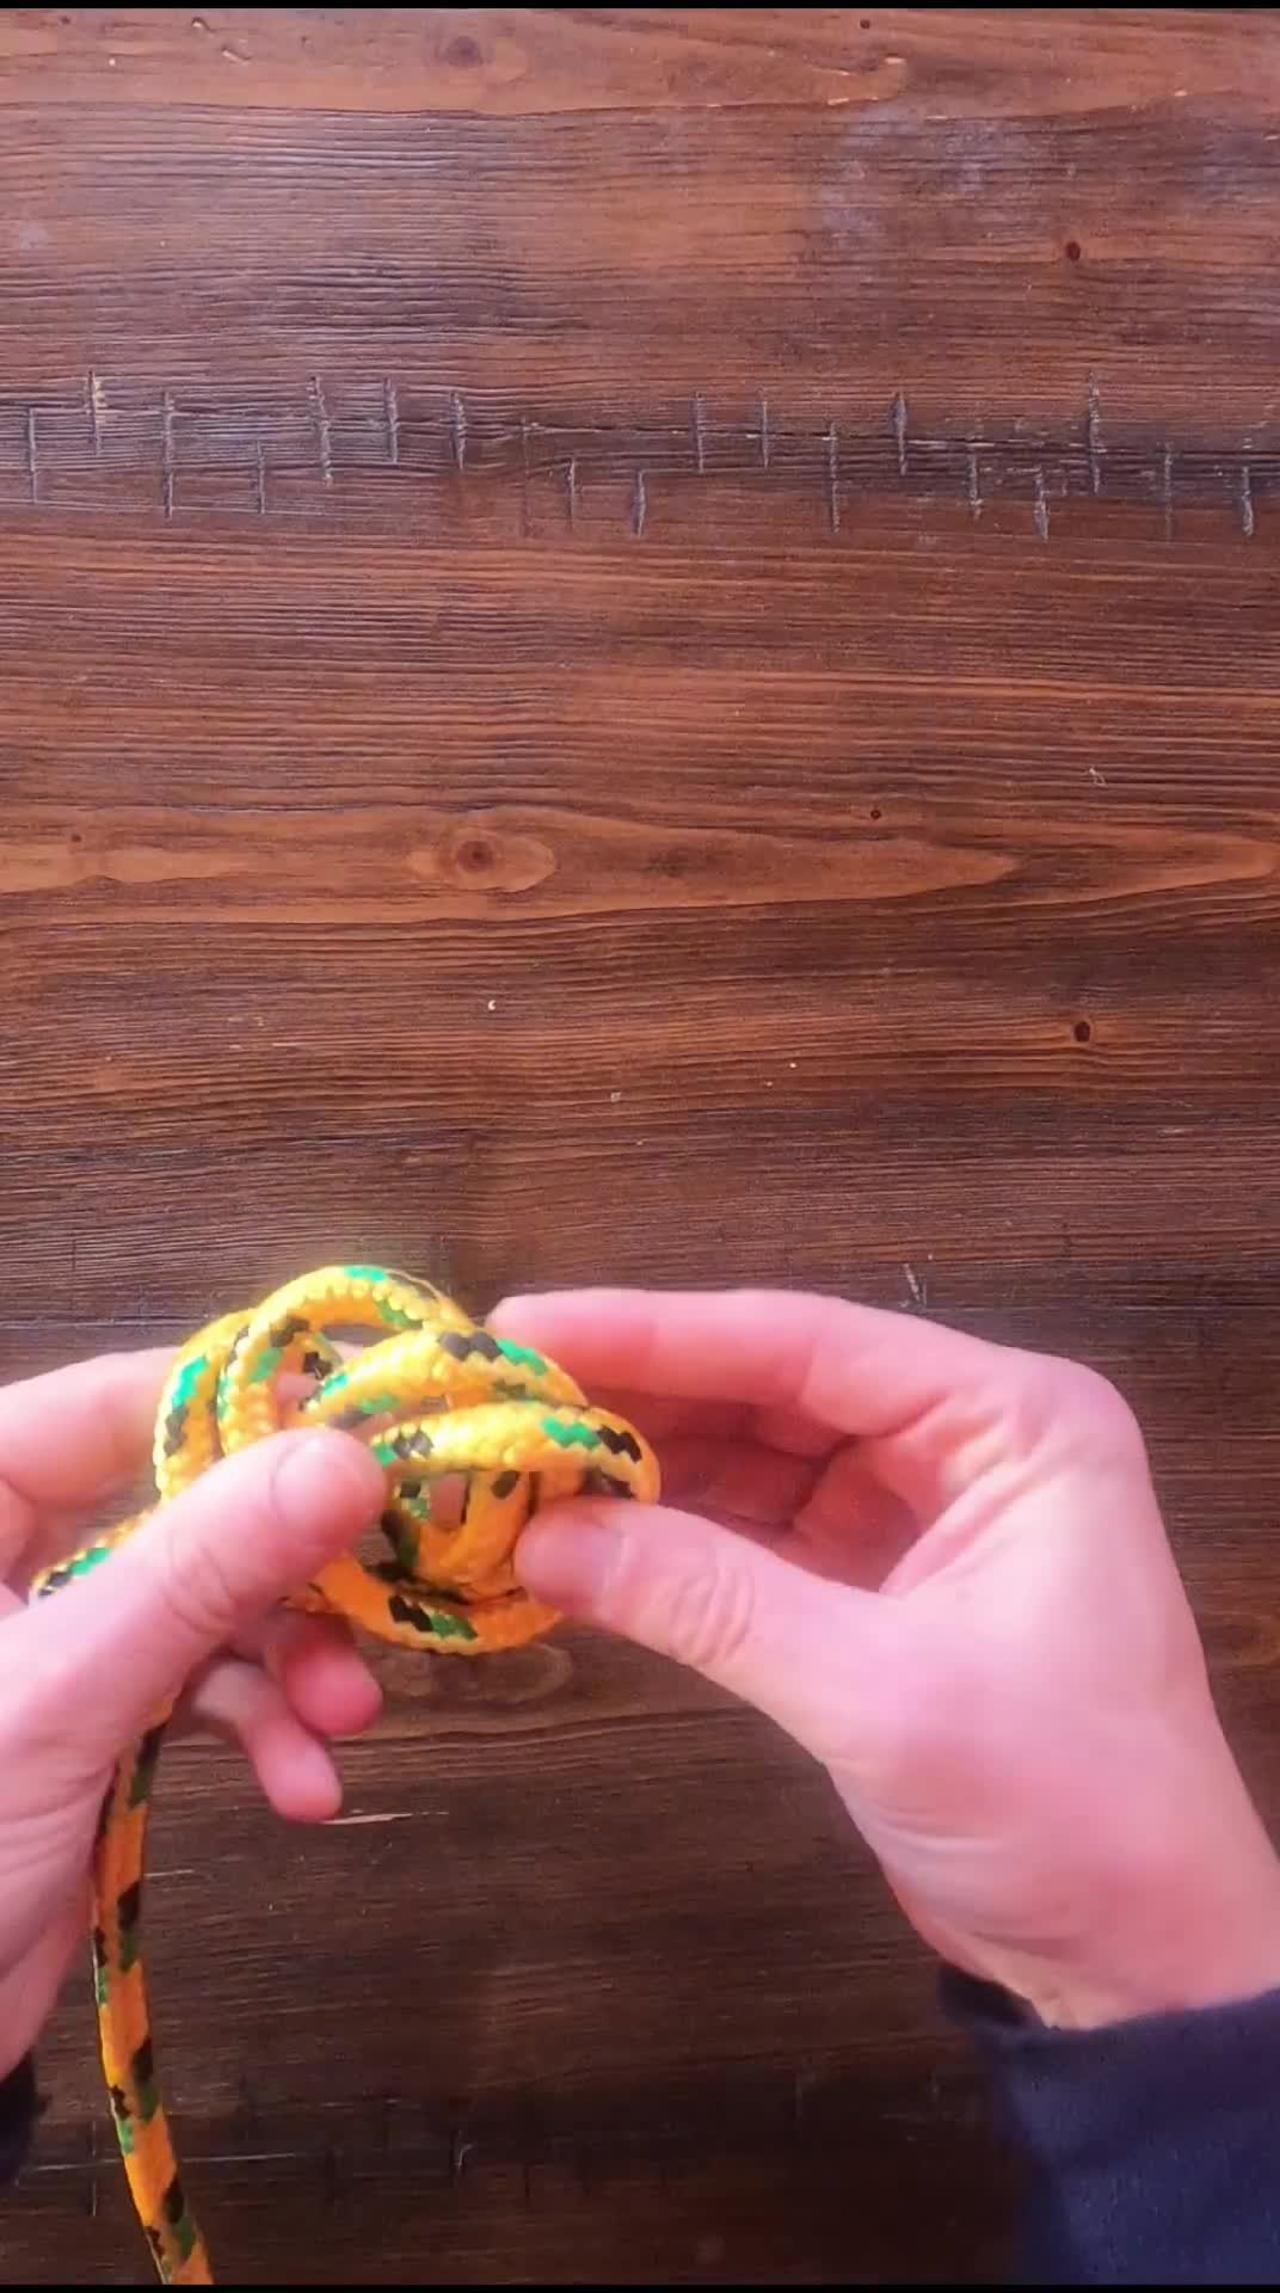 How to tie a overhand loop knot